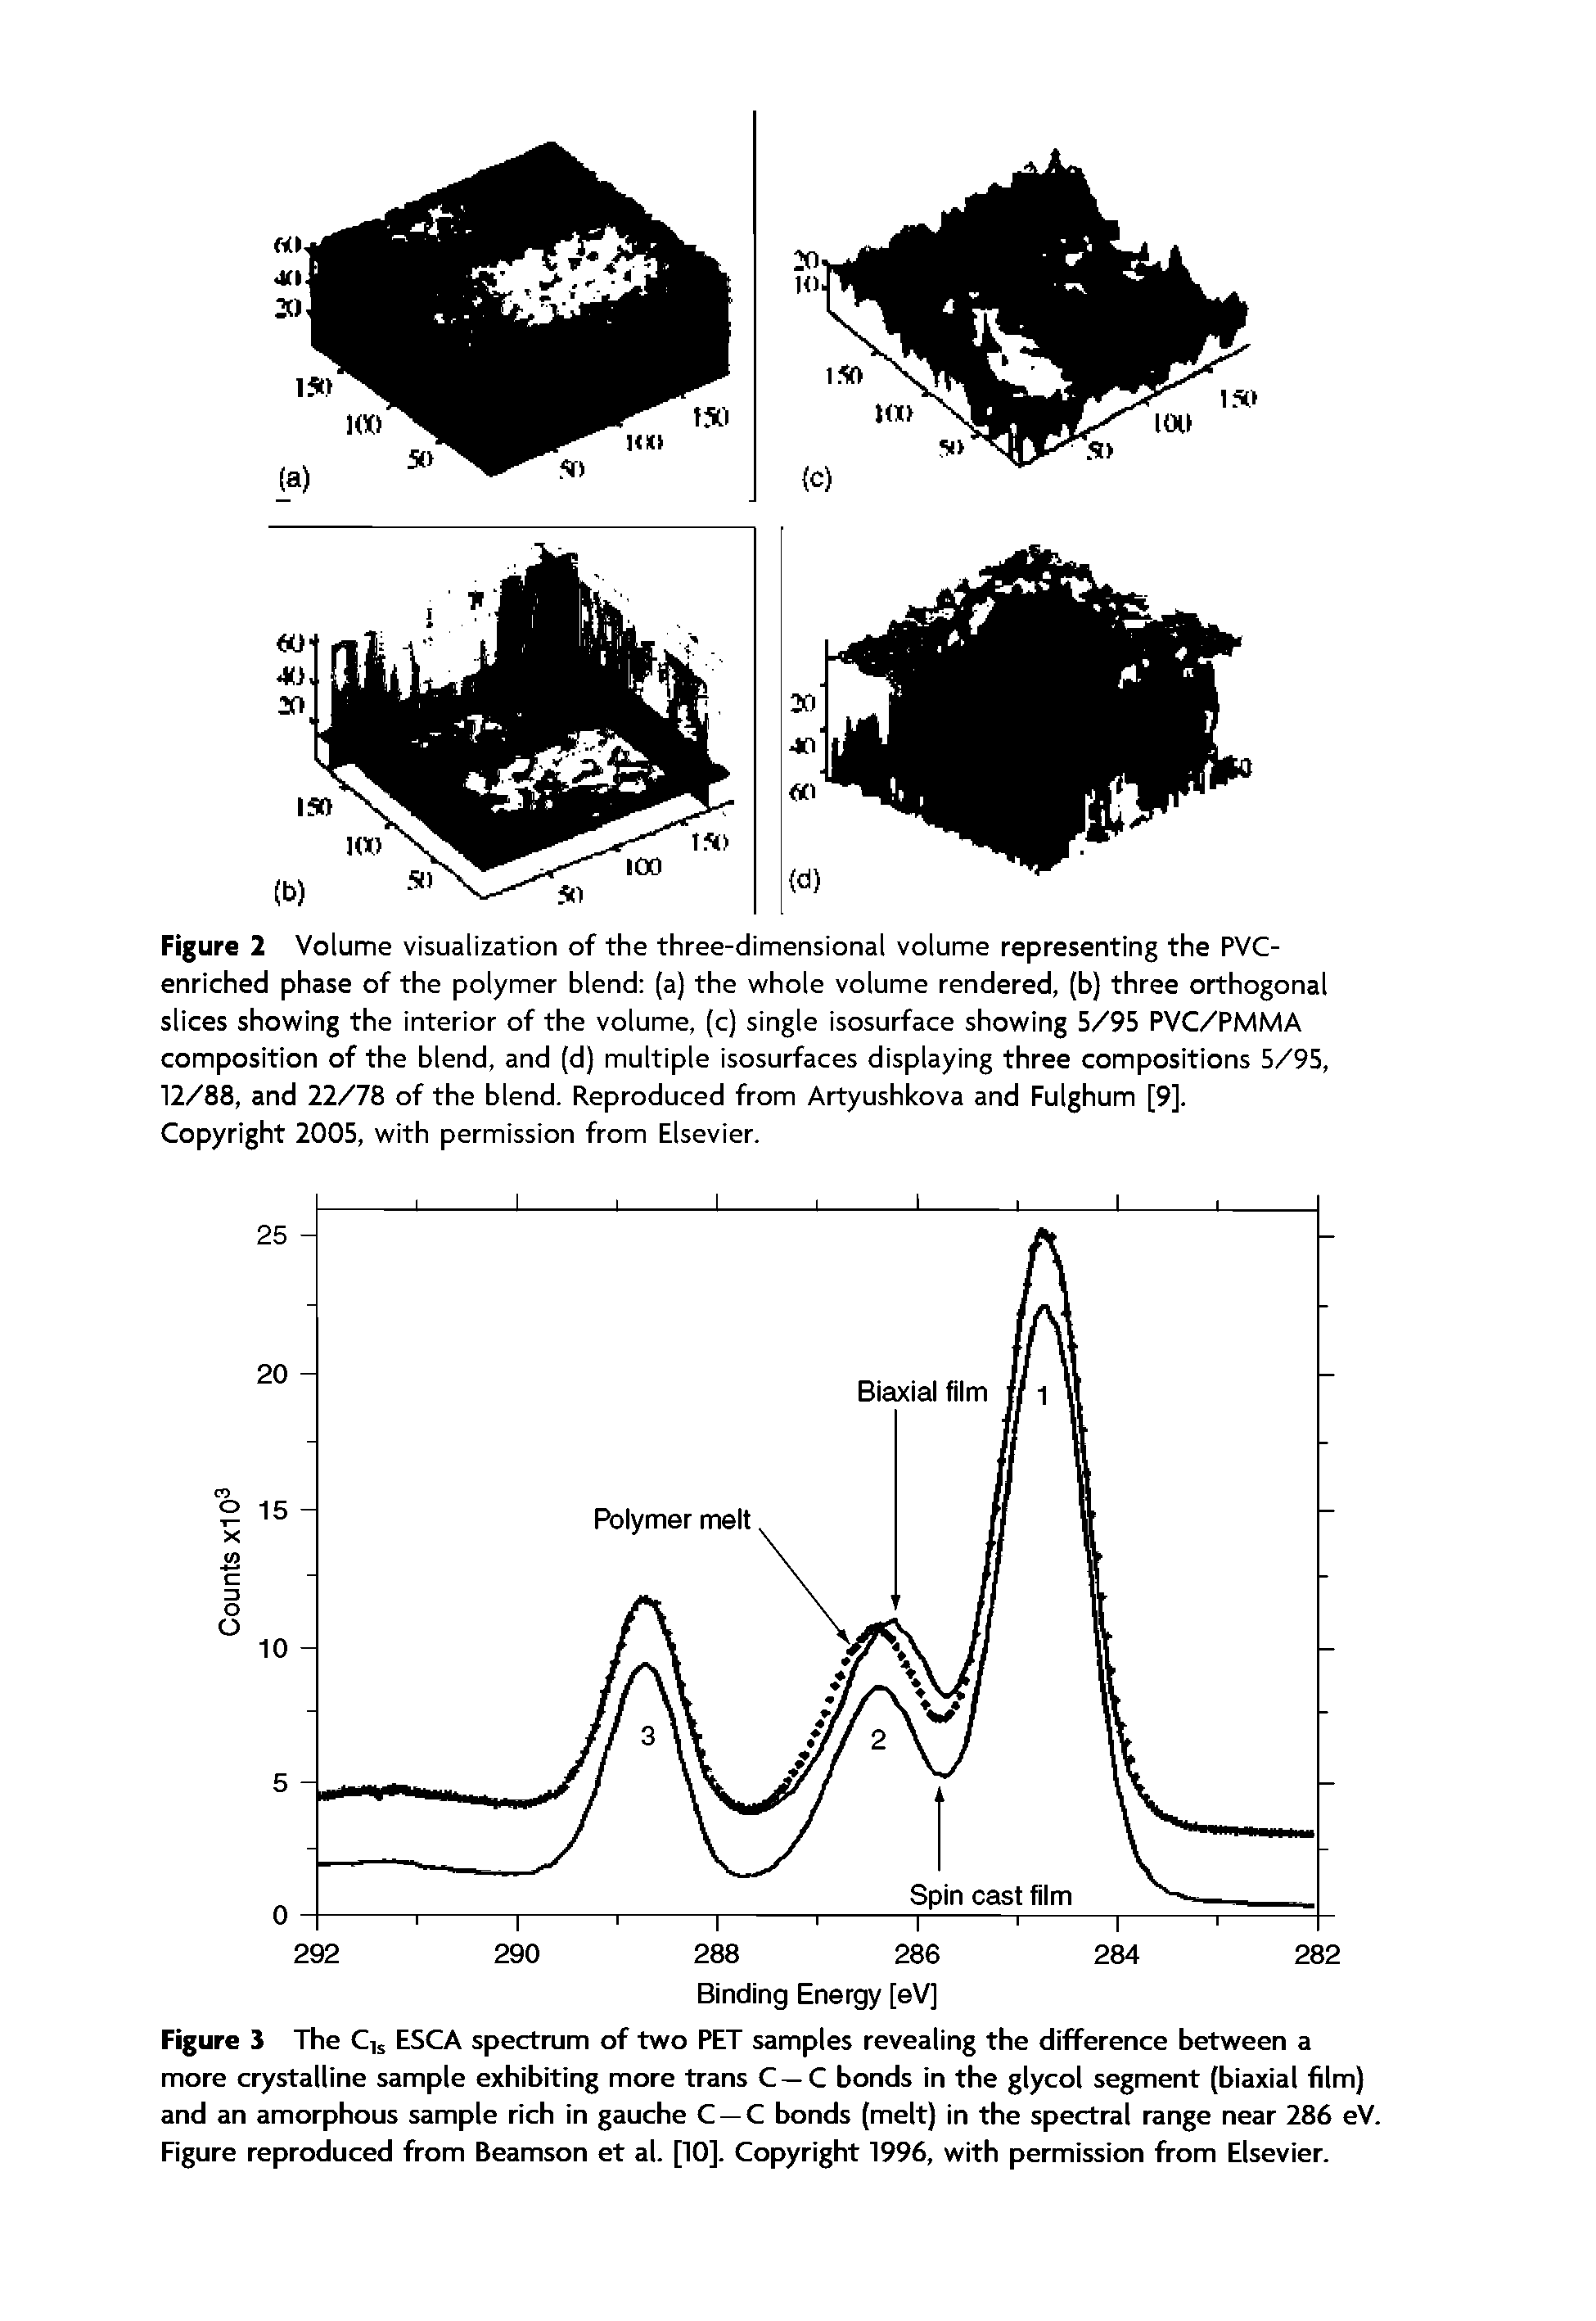 Figure 2 Volume visualization of the three-dimensional volume representing the PVC-enriched phase of the polymer blend (a) the whole volume rendered, (b) three orthogonal slices showing the interior of the volume, (c) single isosurface showing 5/95 PVC/PMMA composition of the blend, and (d) multiple isosurfaces displaying three compositions 5/95, 12/88, and 22/78 of the blend. Reproduced from Artyushkova and Fulghum [9].